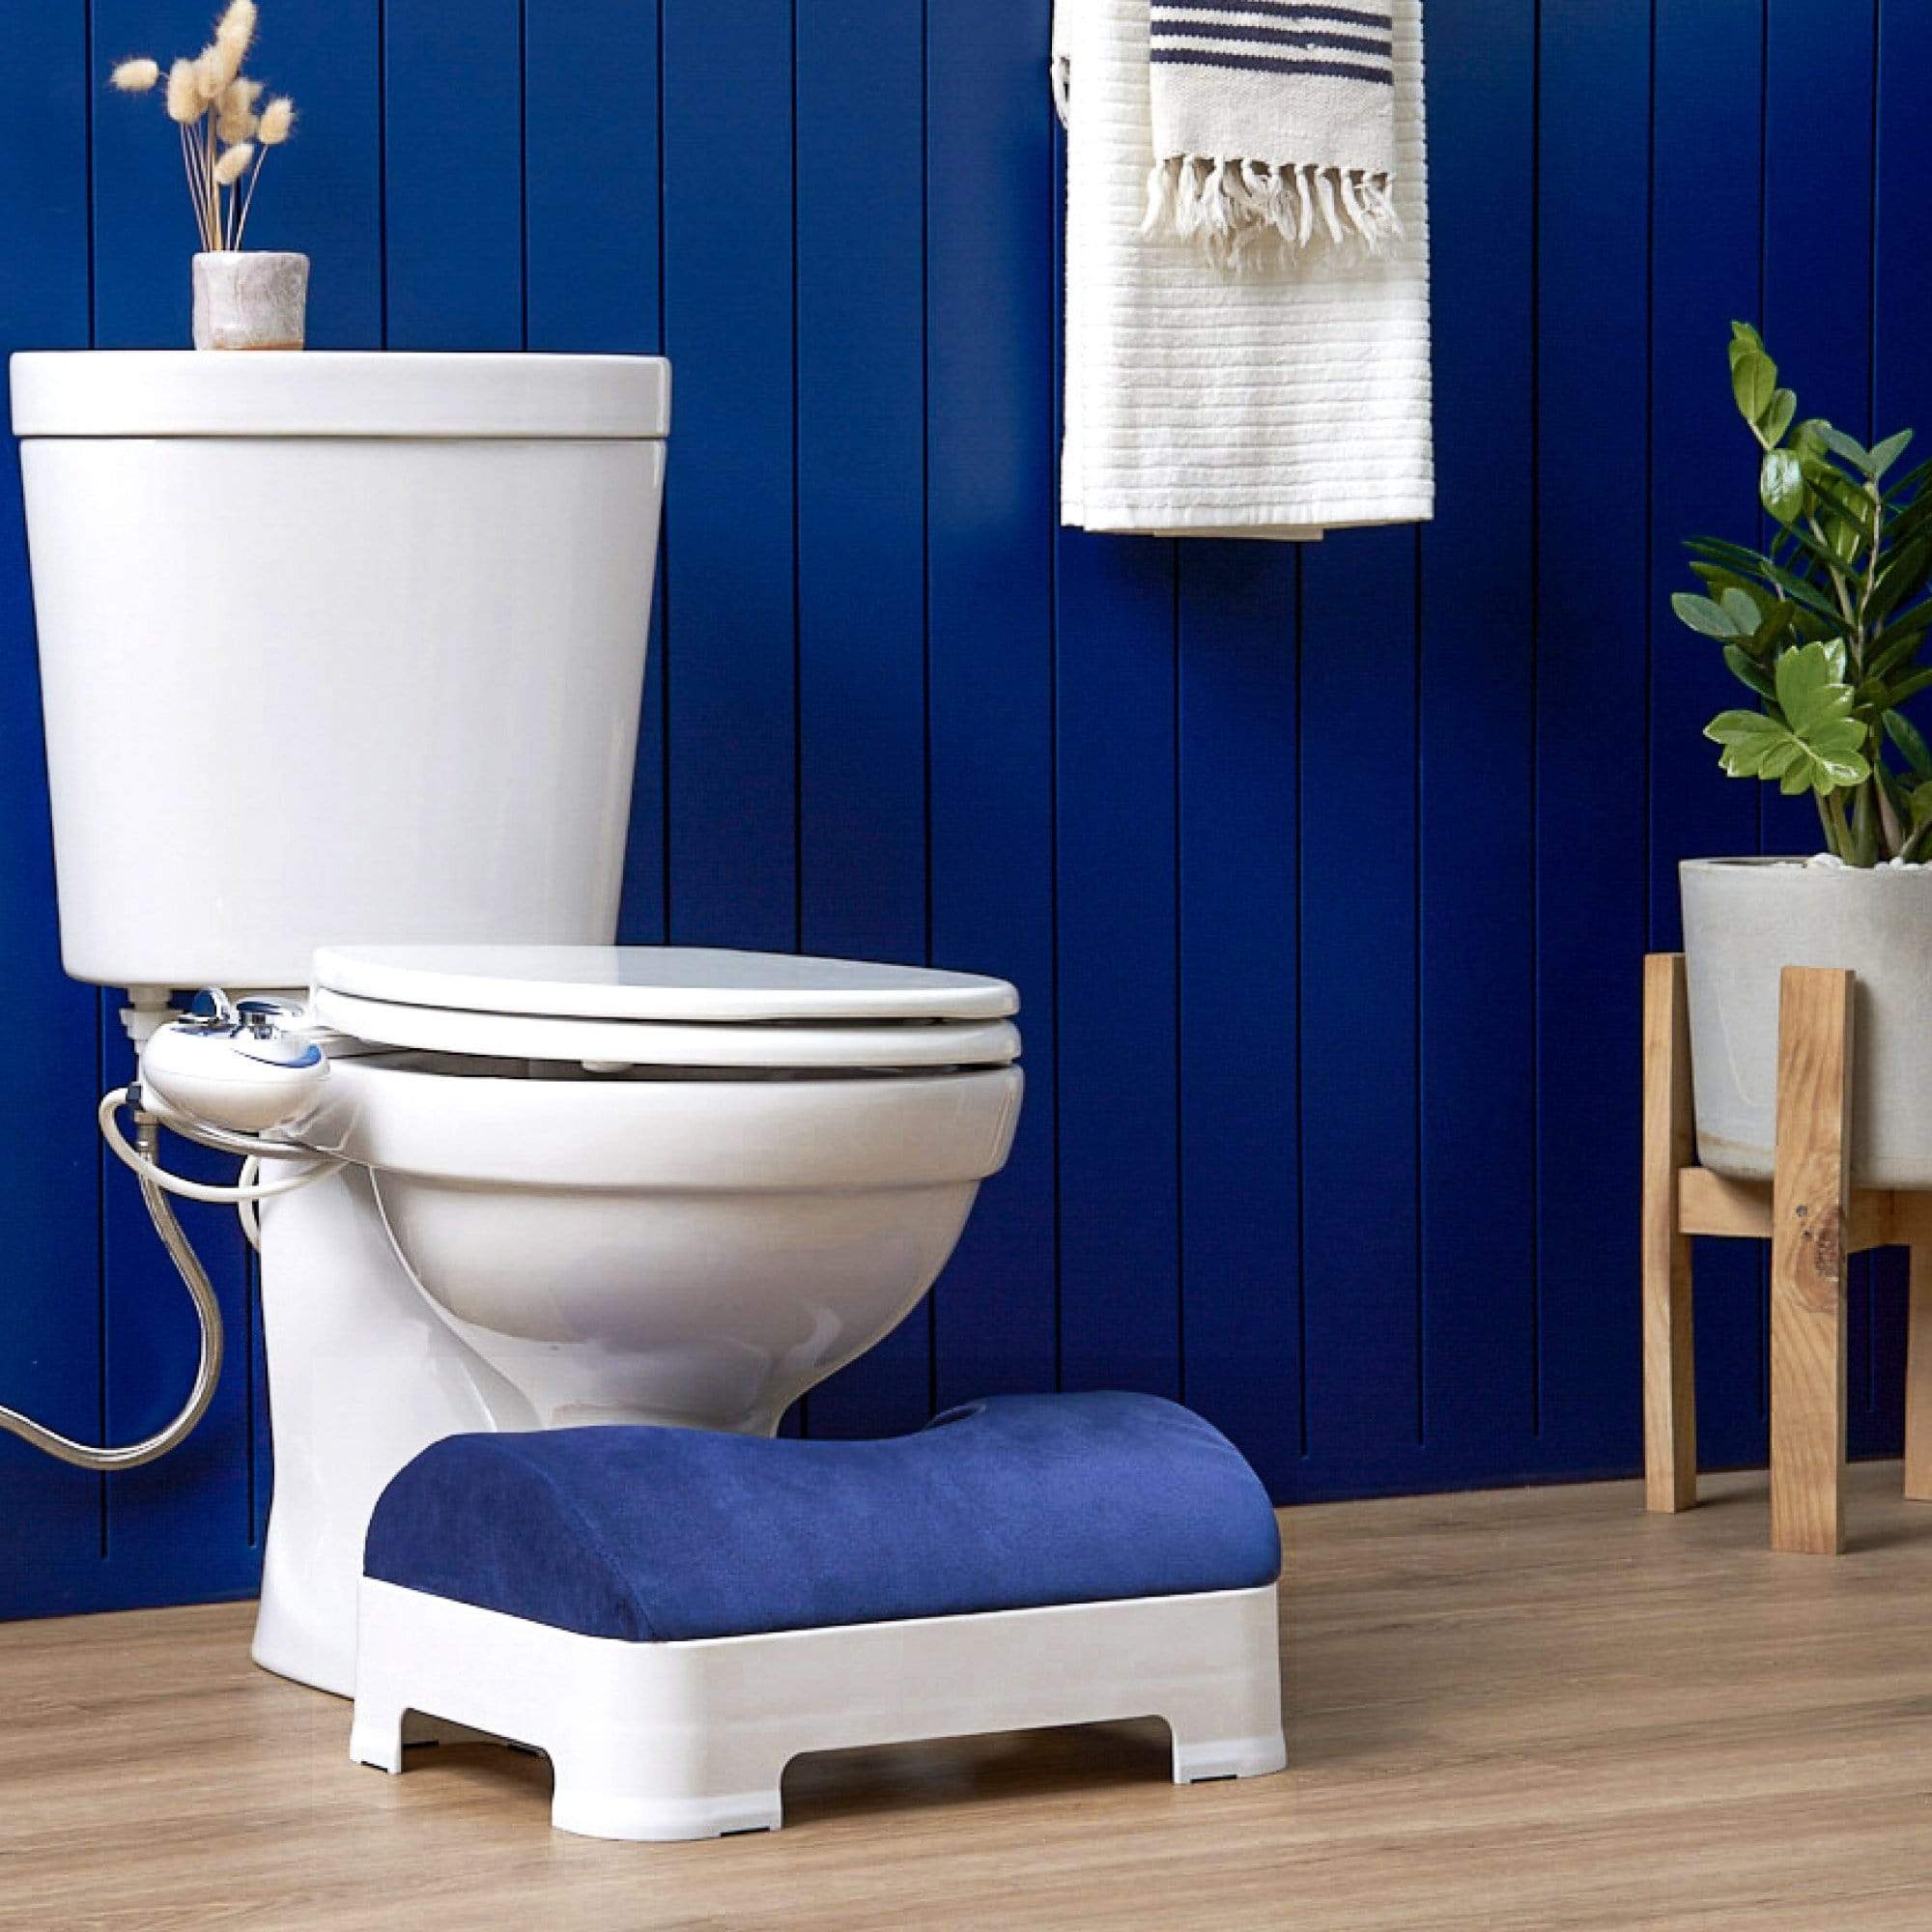 LUXE Footstool: Velour Covers - Navy Blue - Footstool is tucked into toilet in a modern bathroom